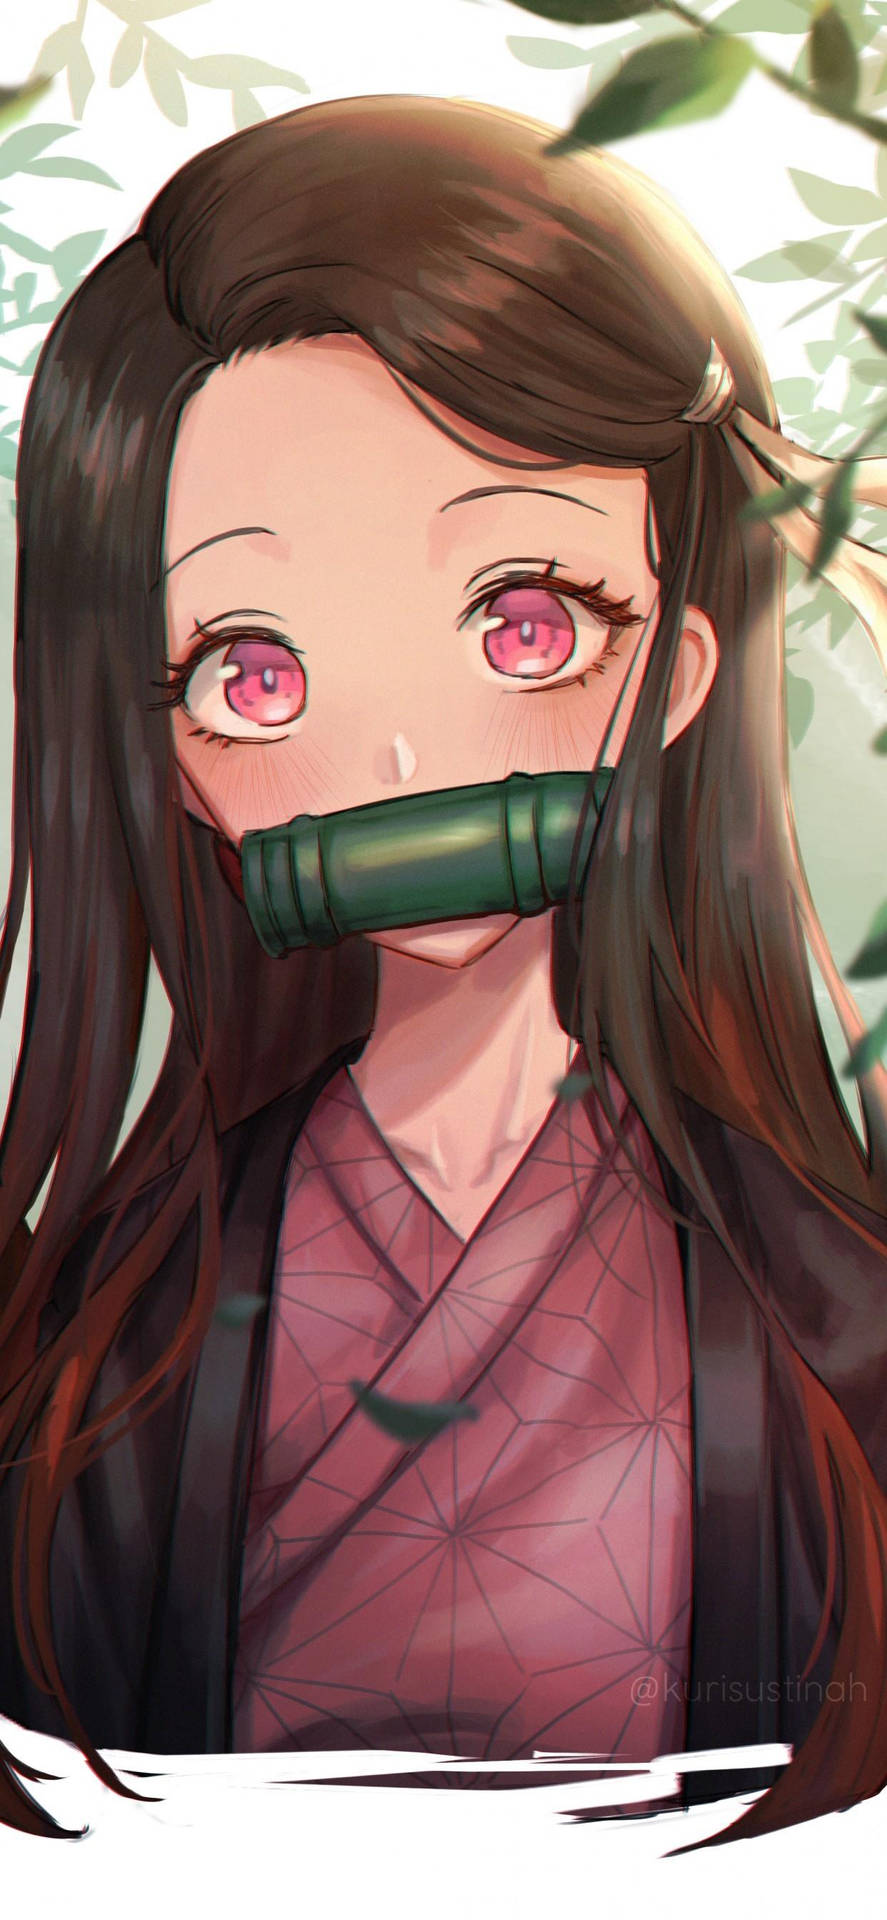 Now with Nezuko on your Iphone, you'll be ready for anything! Wallpaper